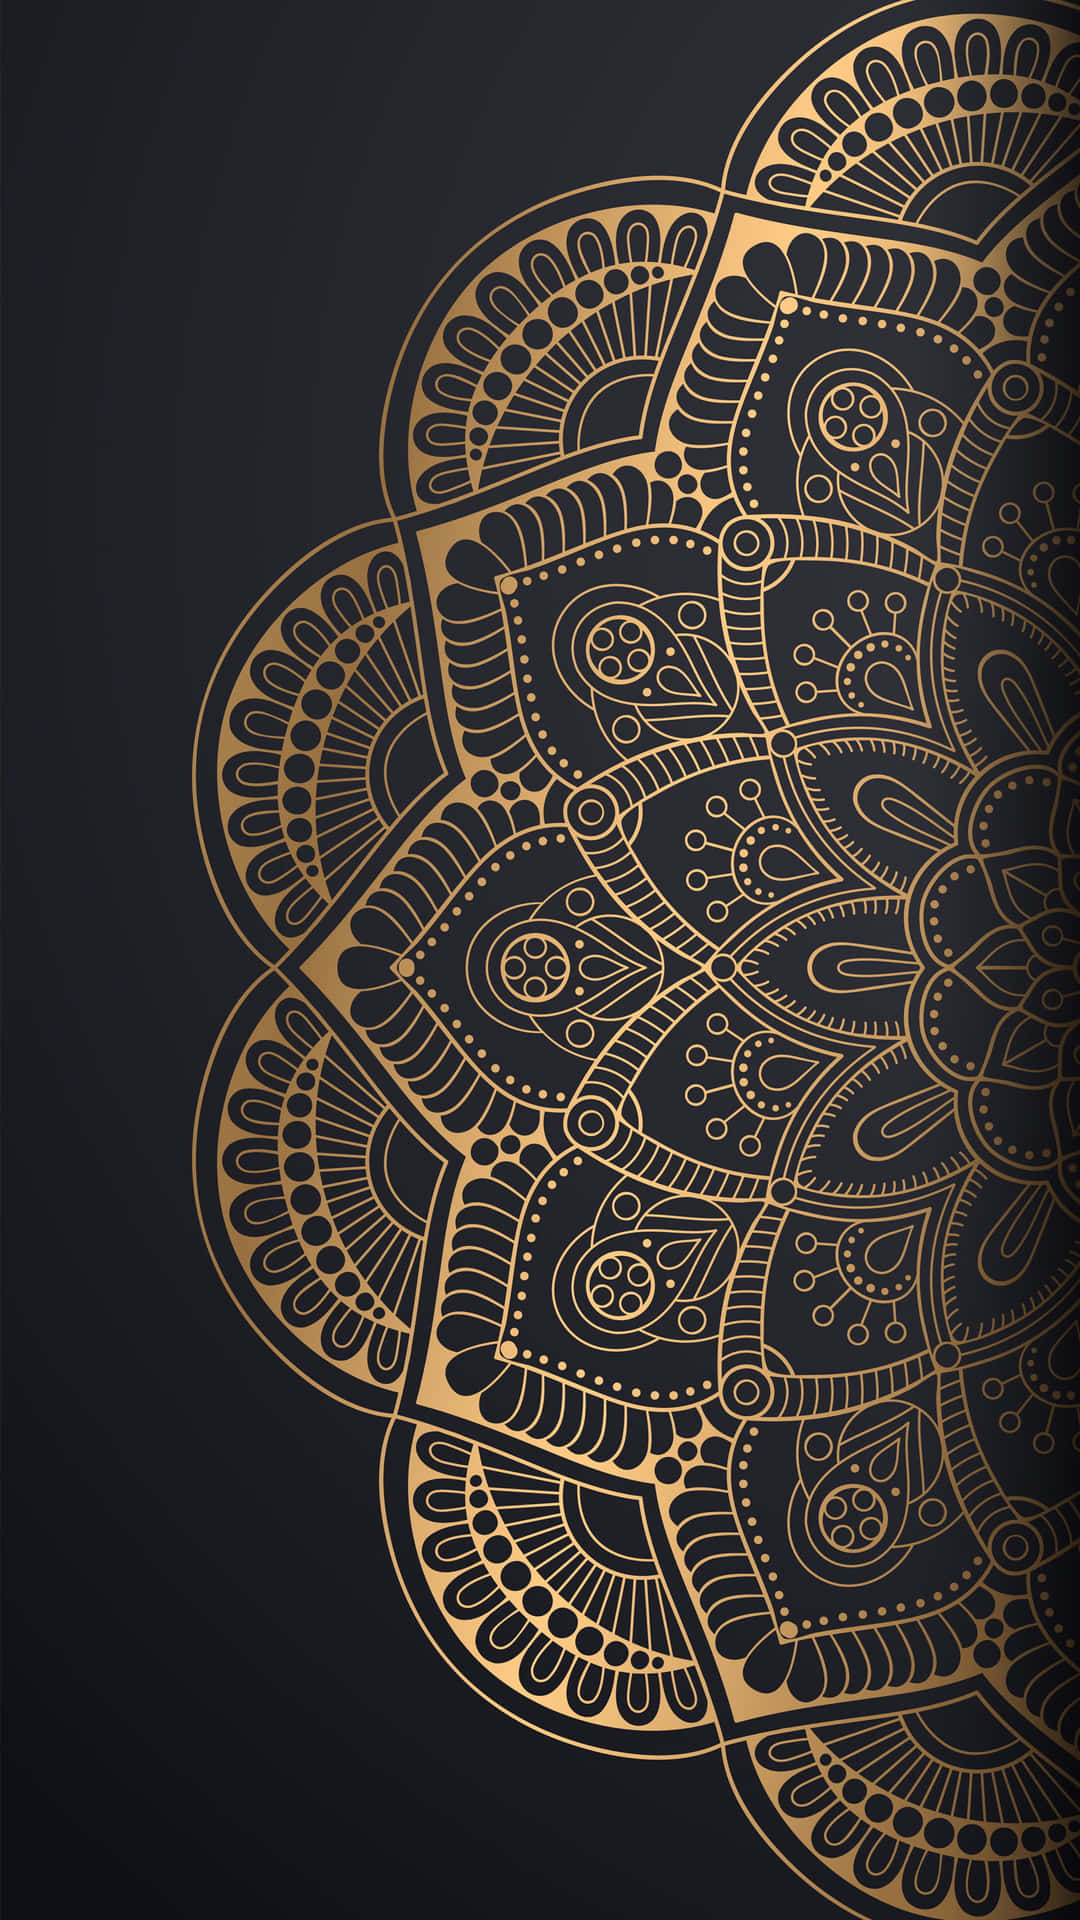 Top 999+ Black And Gold Wallpaper Full HD, 4K✓Free to Use